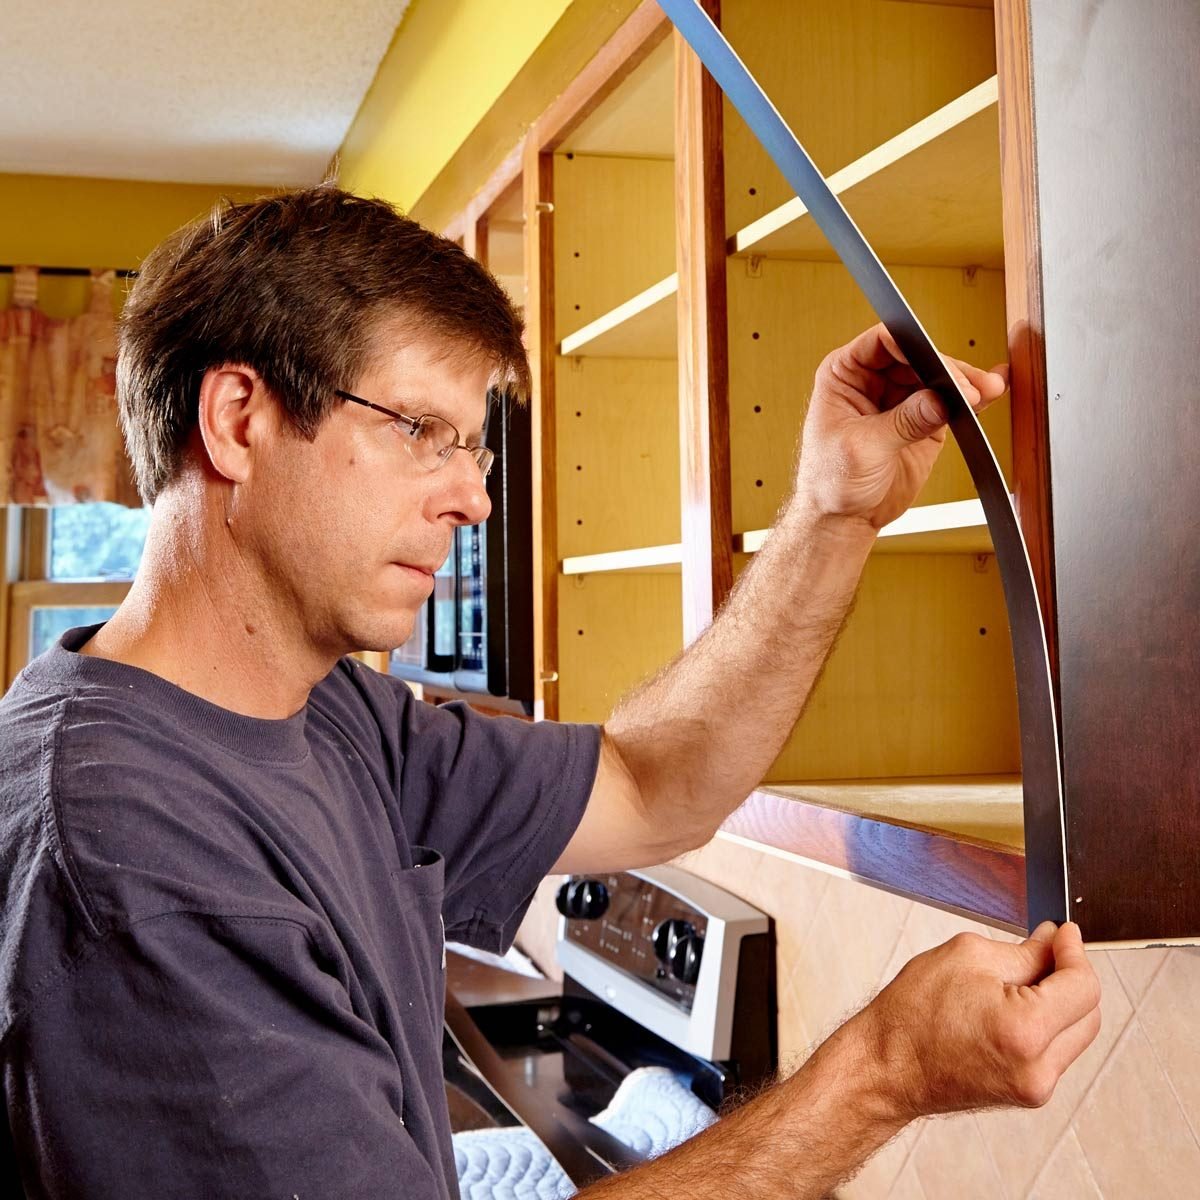 How to Reface Cabinets - DIY Guide to Replace Cabinet Doors